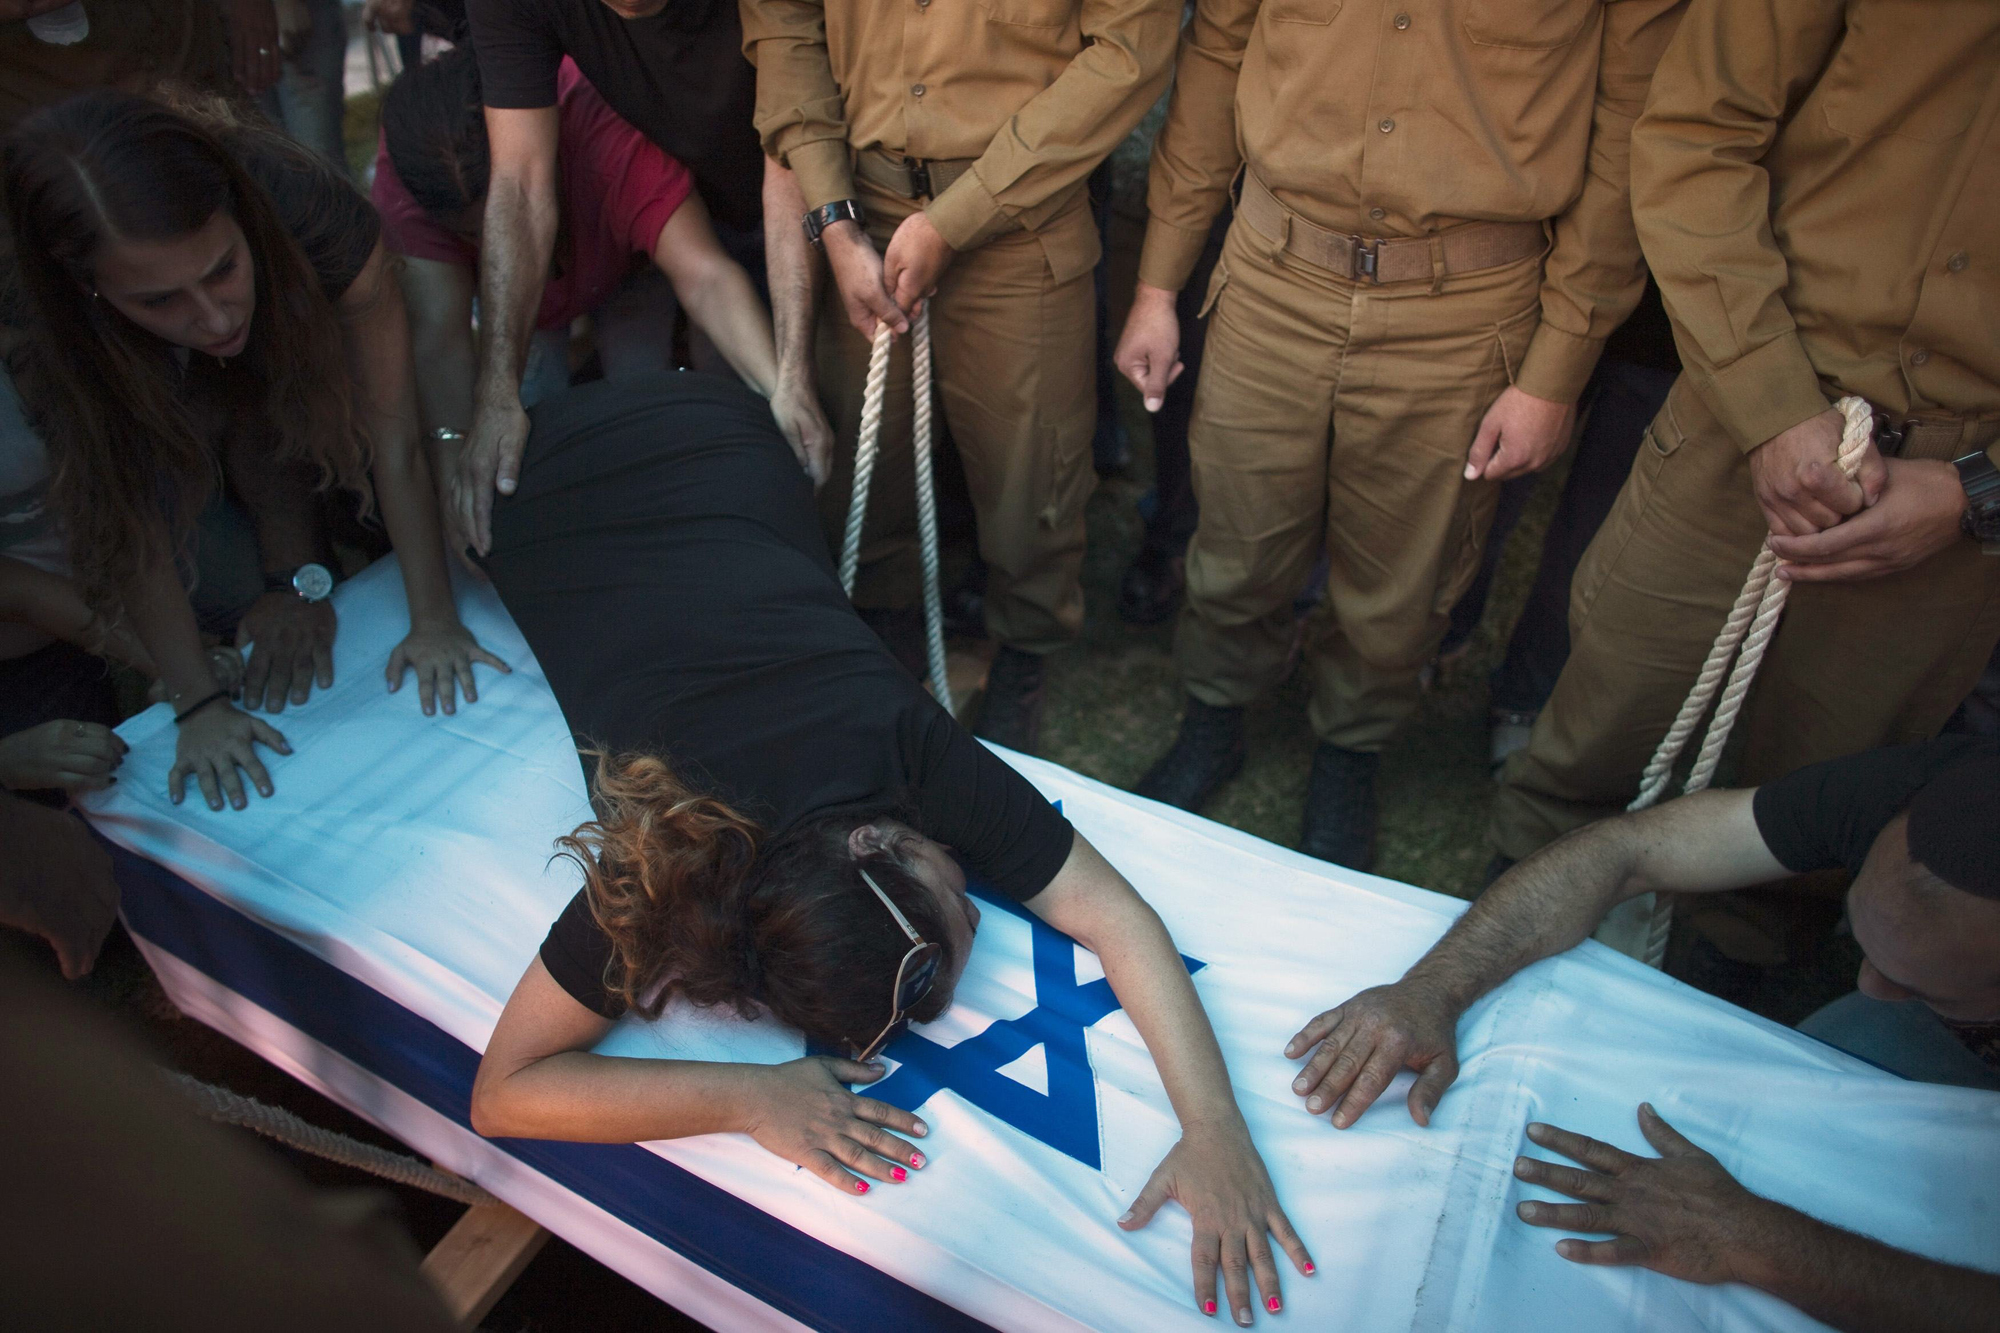 The mother of Israeli soldier Tal Yifrah mourns over his flag-covered coffin during his funeral in Rishon Lezion near Tel Aviv, July 22, 2014.